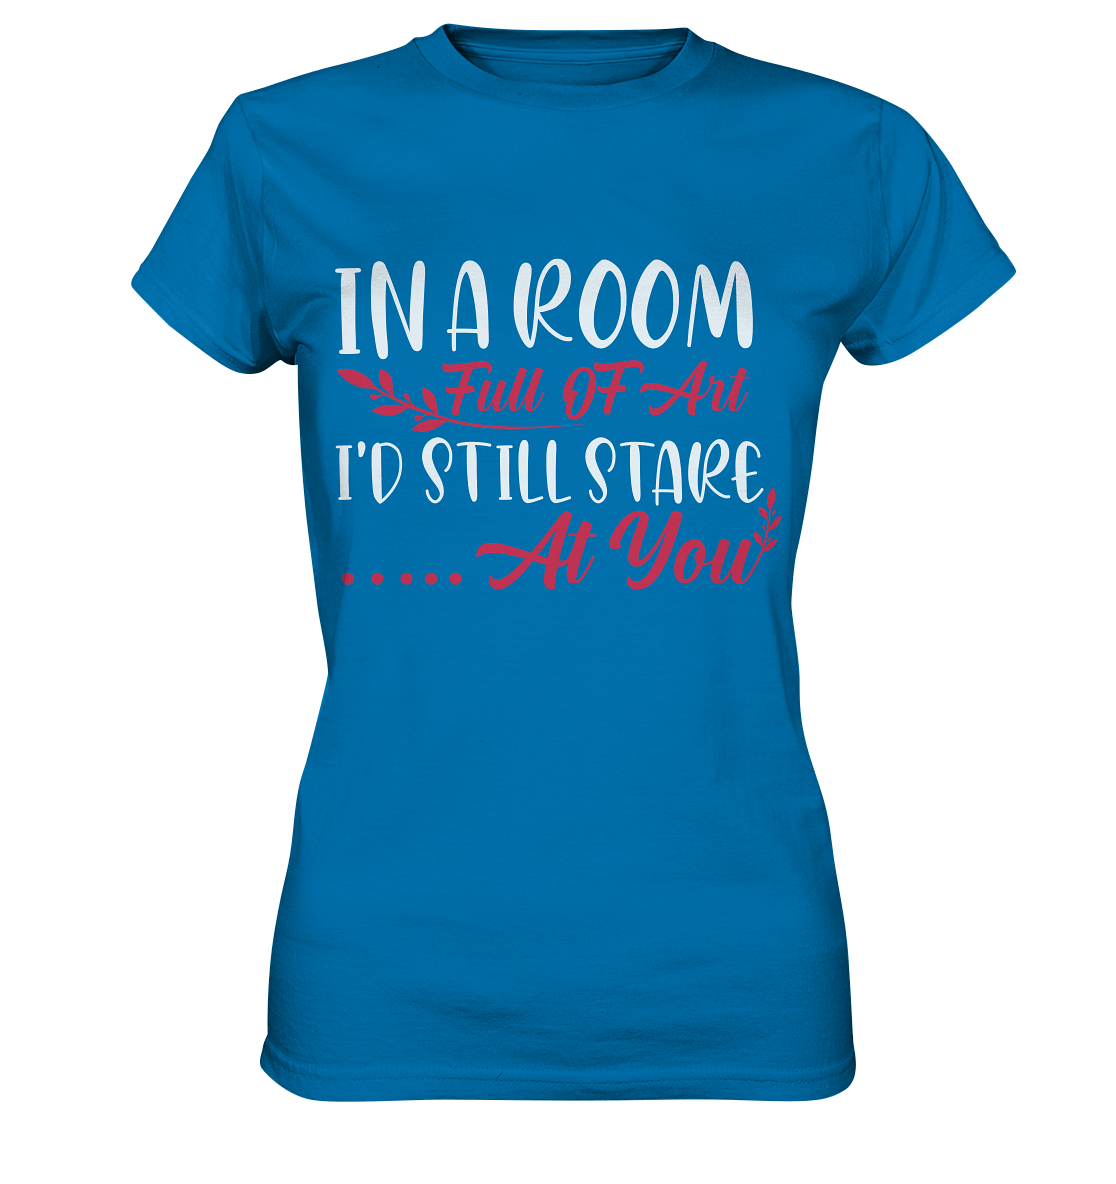 In a room full of art i´d still stare at you - Ladies Premium Shirt